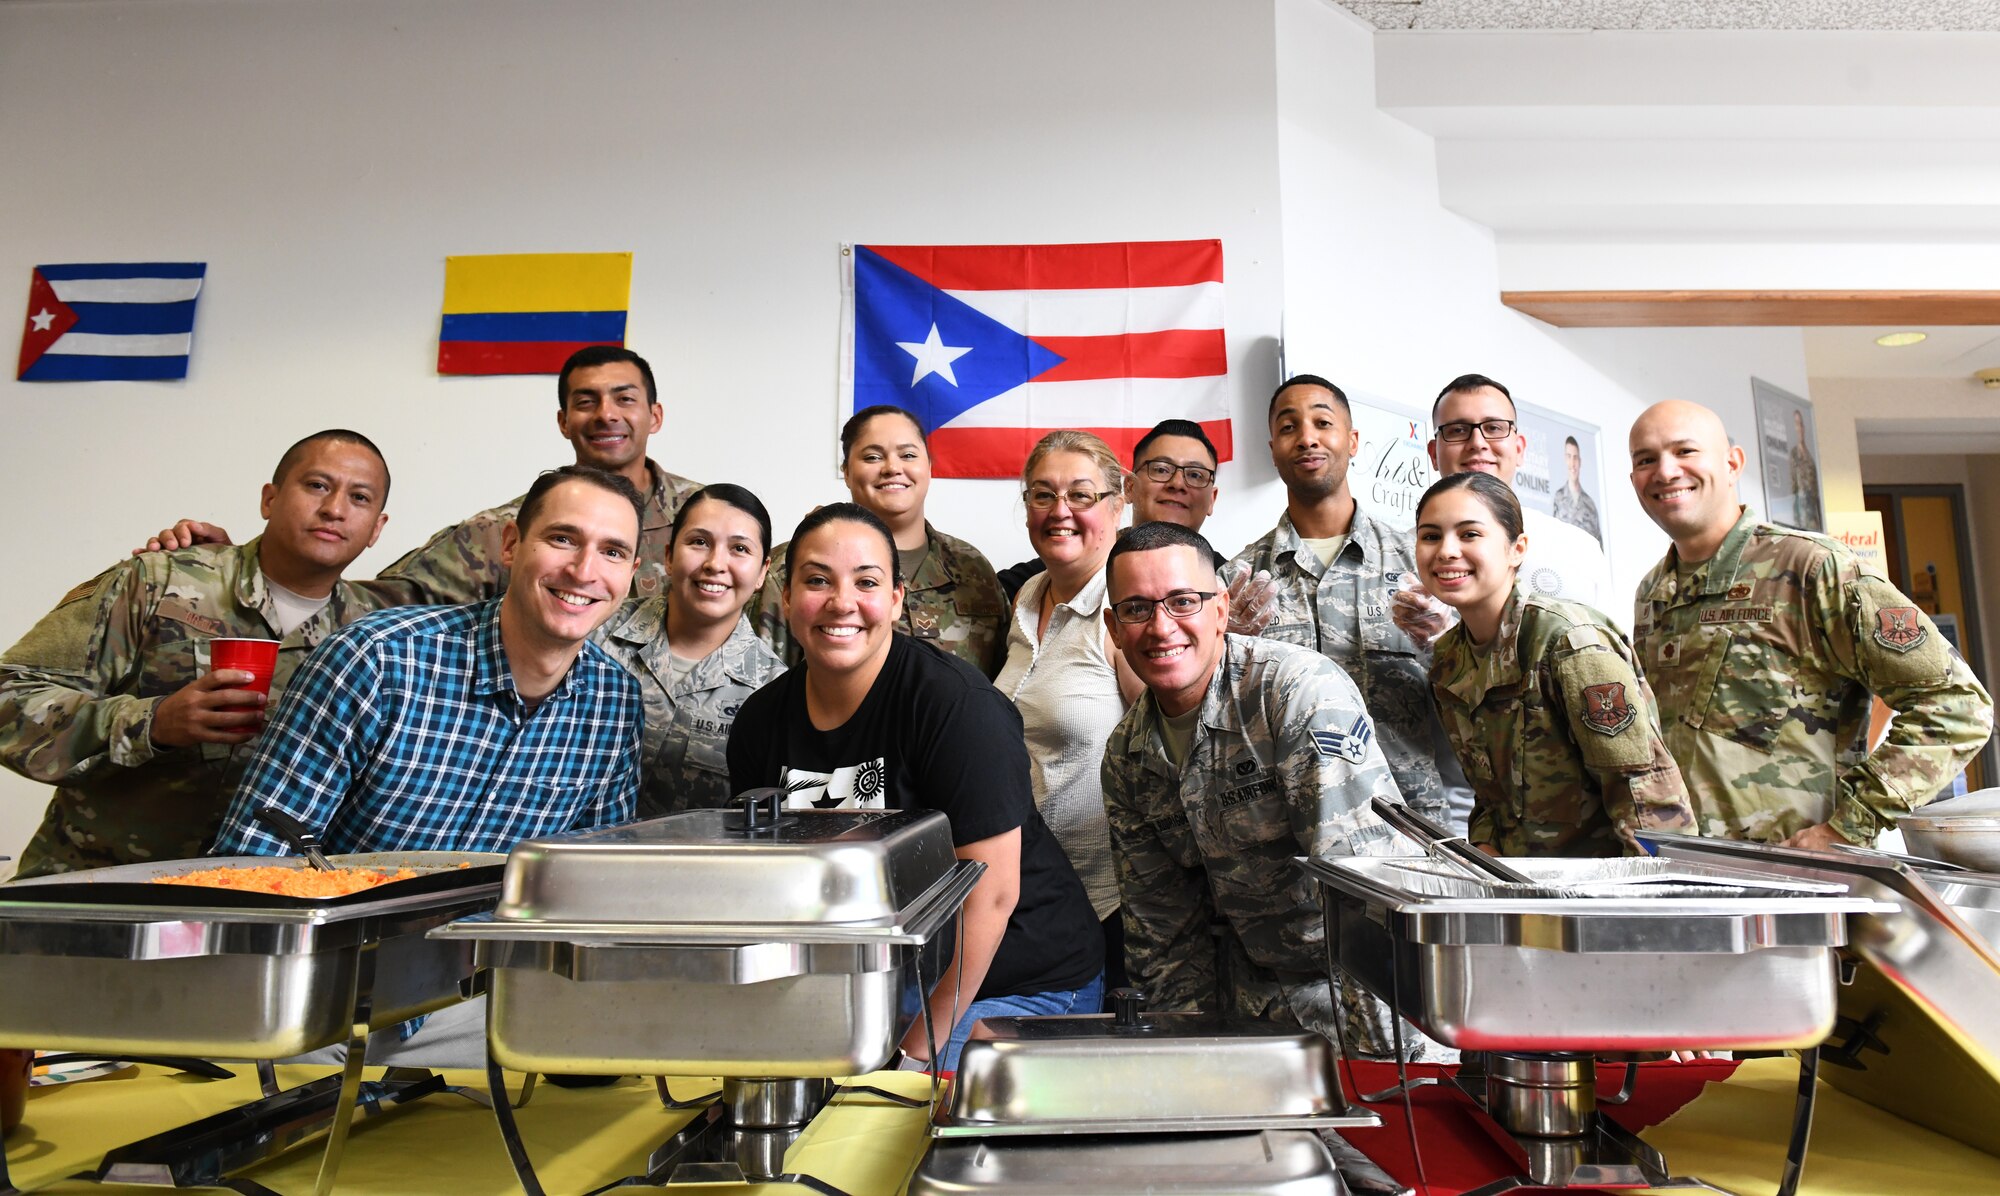 Members of the Ellsworth Latin American Community (ELAC) pose proudly behind dishes they cooked for the ‘Taste of Latin America’ food tasting event, held at the Base Exchange food court, on Ellsworth Air Force Base, S.D., Sept. 16, 2019. The ELAC was created to recognize the diverse cultures and contributions of Latin and Hispanic American people throughout the Ellsworth AFB community. (U.S. Air Force photo by Airman 1st Class Christina Bennett)